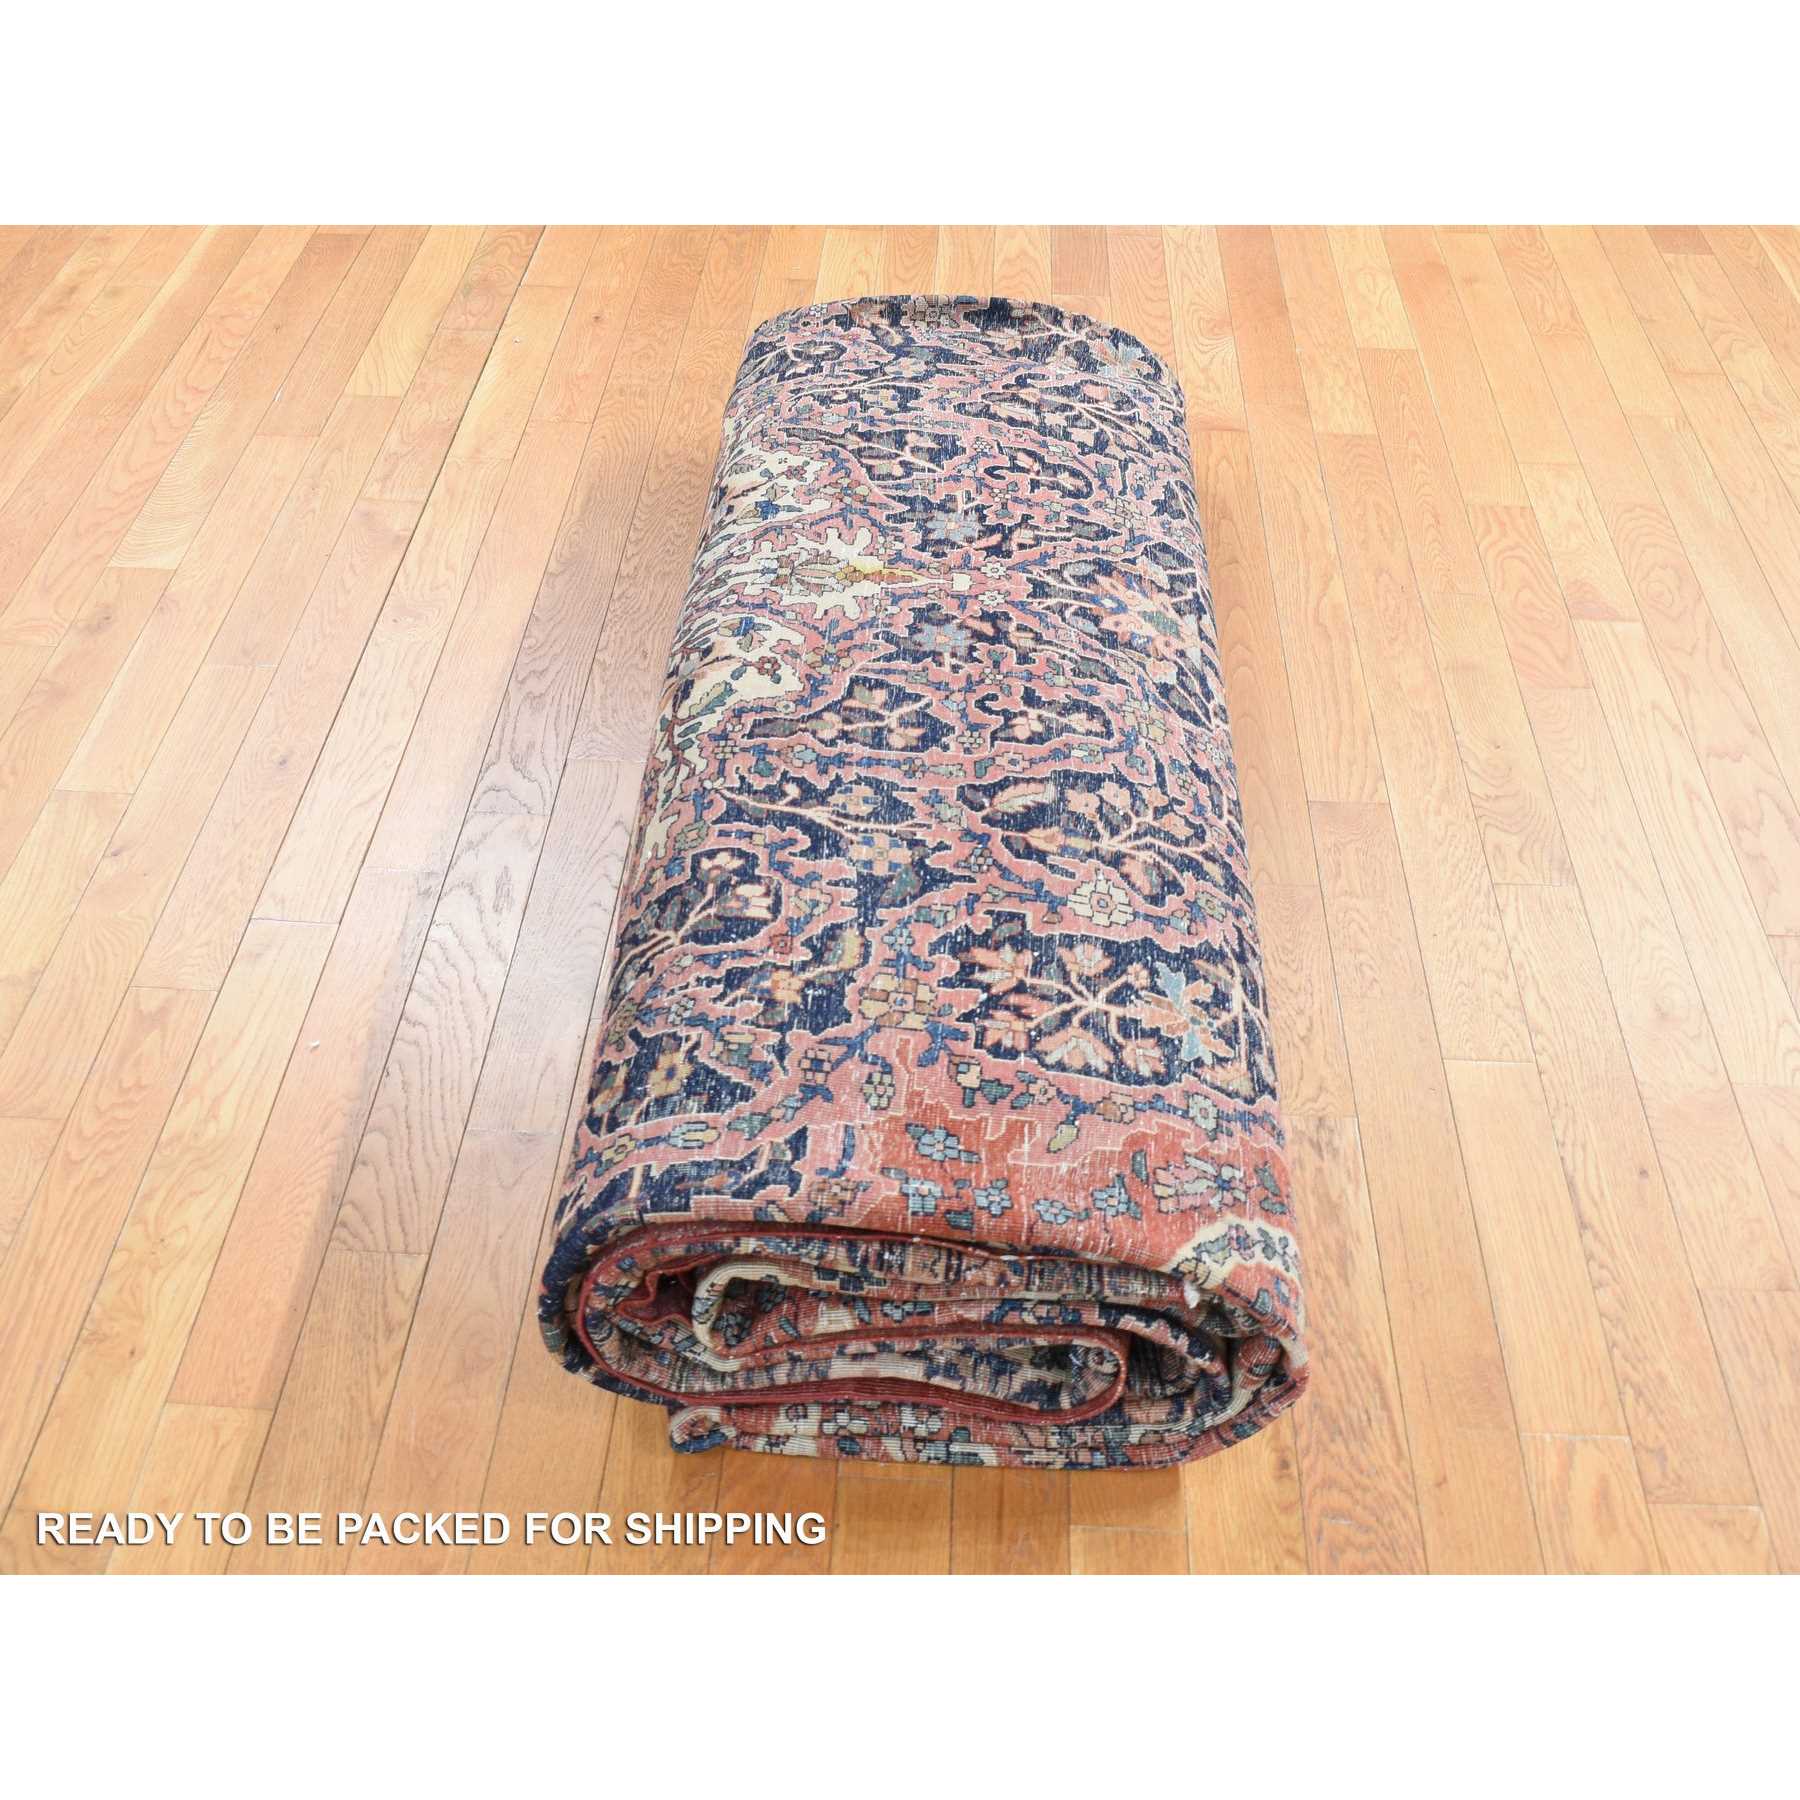 Antique-Hand-Knotted-Rug-403495